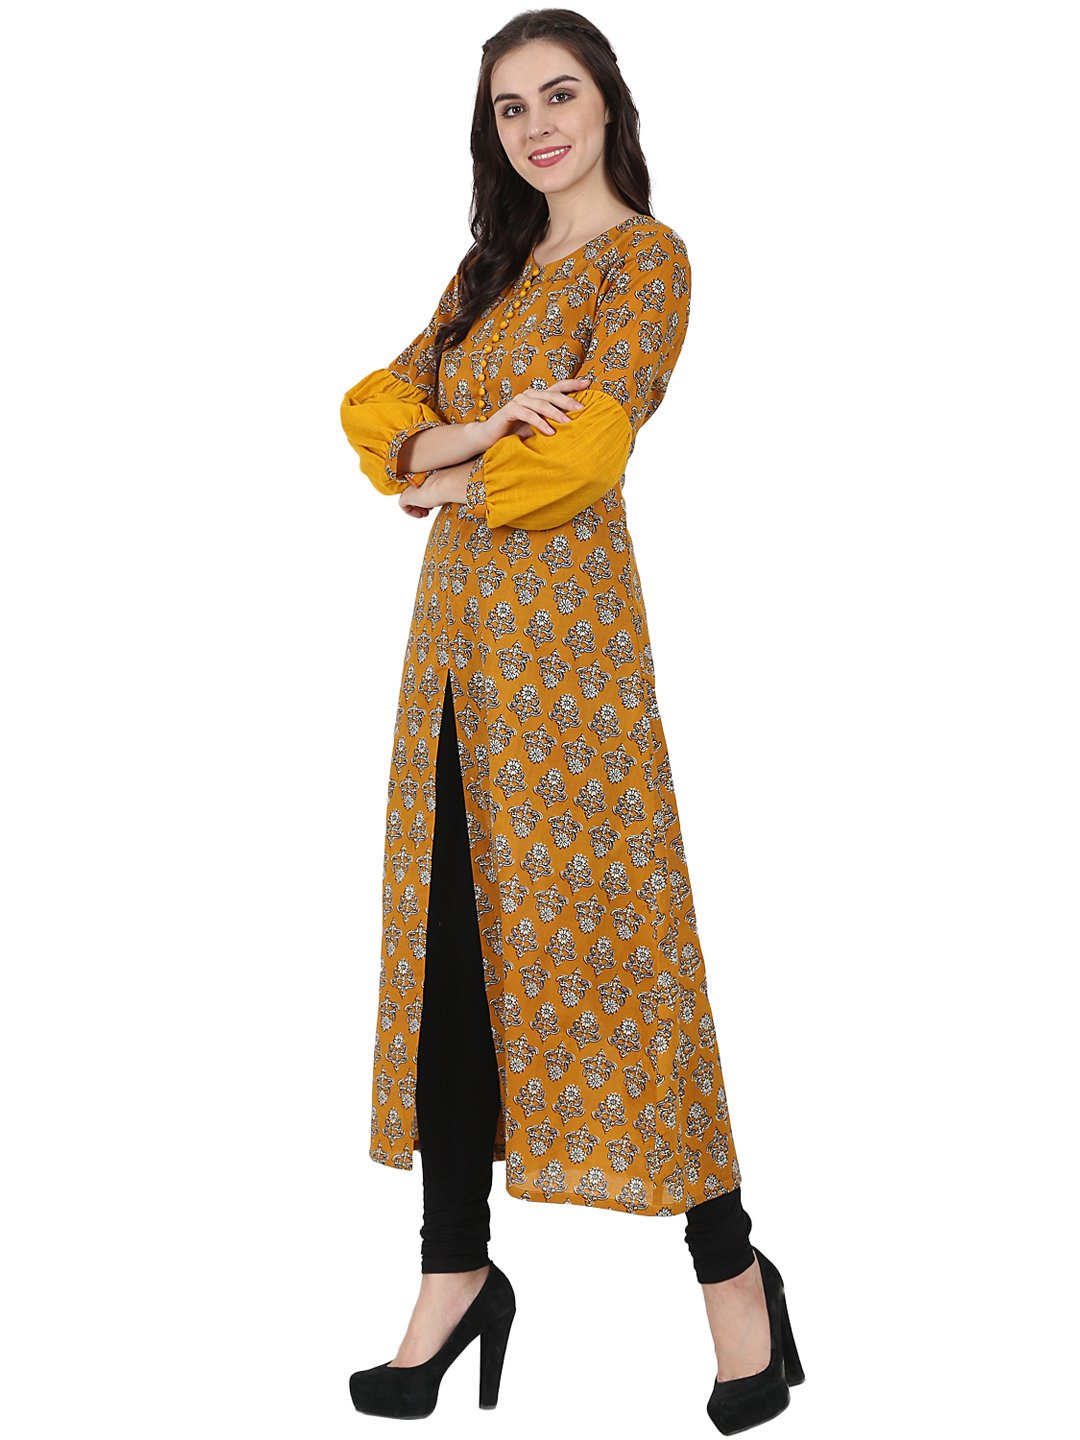 Women's Yellow Printed Full Sleeve Cotton A-Line Kurta With Centre Slit - Nayo Clothing